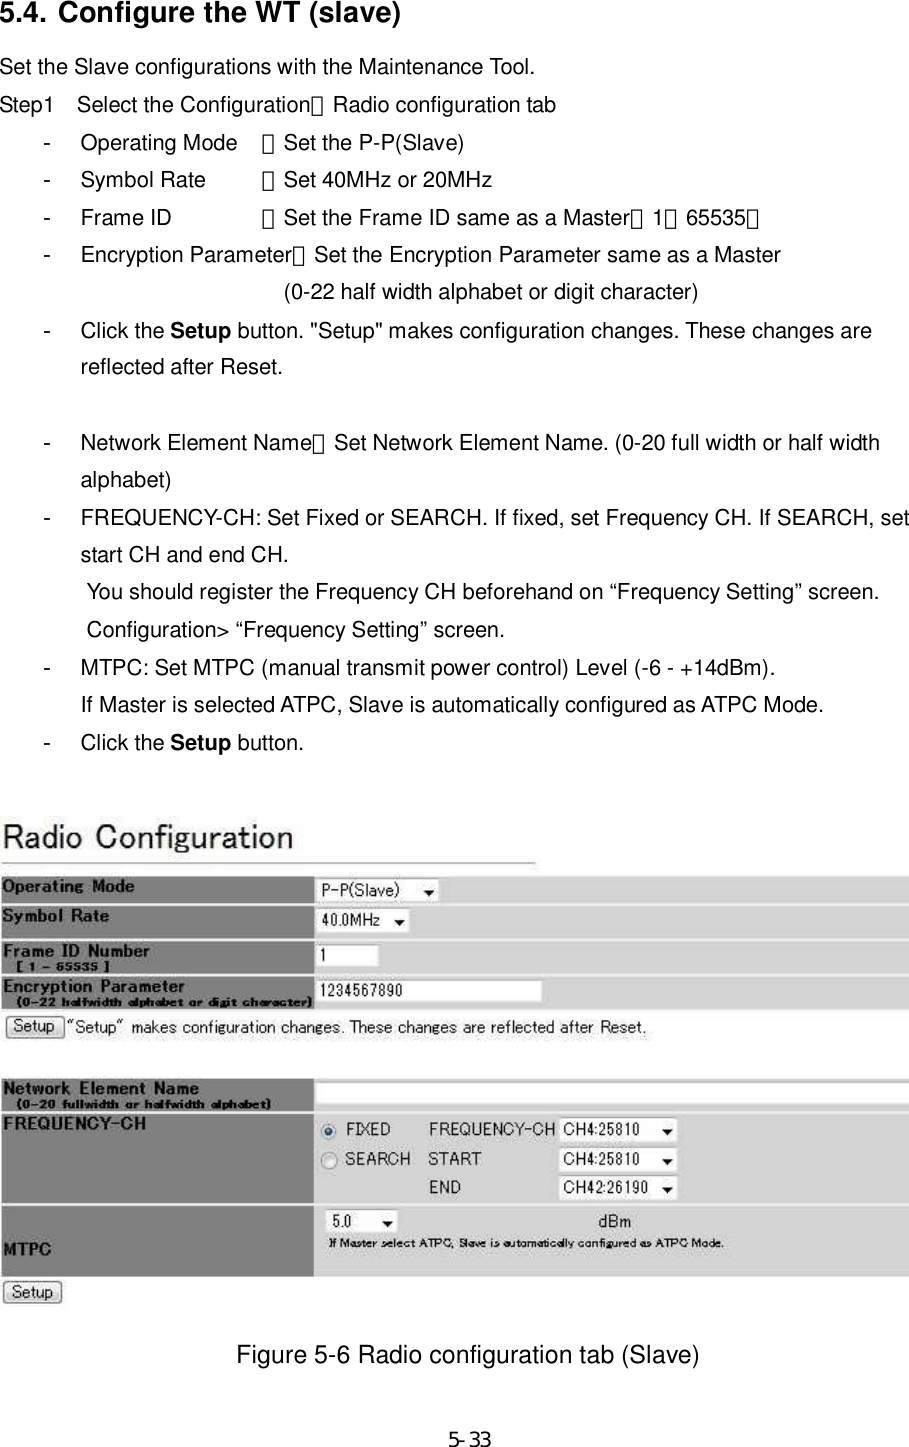     5-335.4. Configure the WT (slave) Set the Slave configurations with the Maintenance Tool. Step1    Select the Configuration＞Radio configuration tab -  Operating Mode  ：Set the P-P(Slave) -  Symbol Rate  ：Set 40MHz or 20MHz -  Frame ID   ：Set the Frame ID same as a Master（1∼65535） -  Encryption Parameter：Set the Encryption Parameter same as a Master (0-22 half width alphabet or digit character) -  Click the Setup button. &quot;Setup&quot; makes configuration changes. These changes are reflected after Reset.  -  Network Element Name：Set Network Element Name. (0-20 full width or half width alphabet) -  FREQUENCY-CH: Set Fixed or SEARCH. If fixed, set Frequency CH. If SEARCH, set start CH and end CH. You should register the Frequency CH beforehand on “Frequency Setting” screen. Configuration&gt; “Frequency Setting” screen. -  MTPC: Set MTPC (manual transmit power control) Level (-6 - +14dBm). If Master is selected ATPC, Slave is automatically configured as ATPC Mode.   -  Click the Setup button.    Figure 5-6 Radio configuration tab (Slave) 